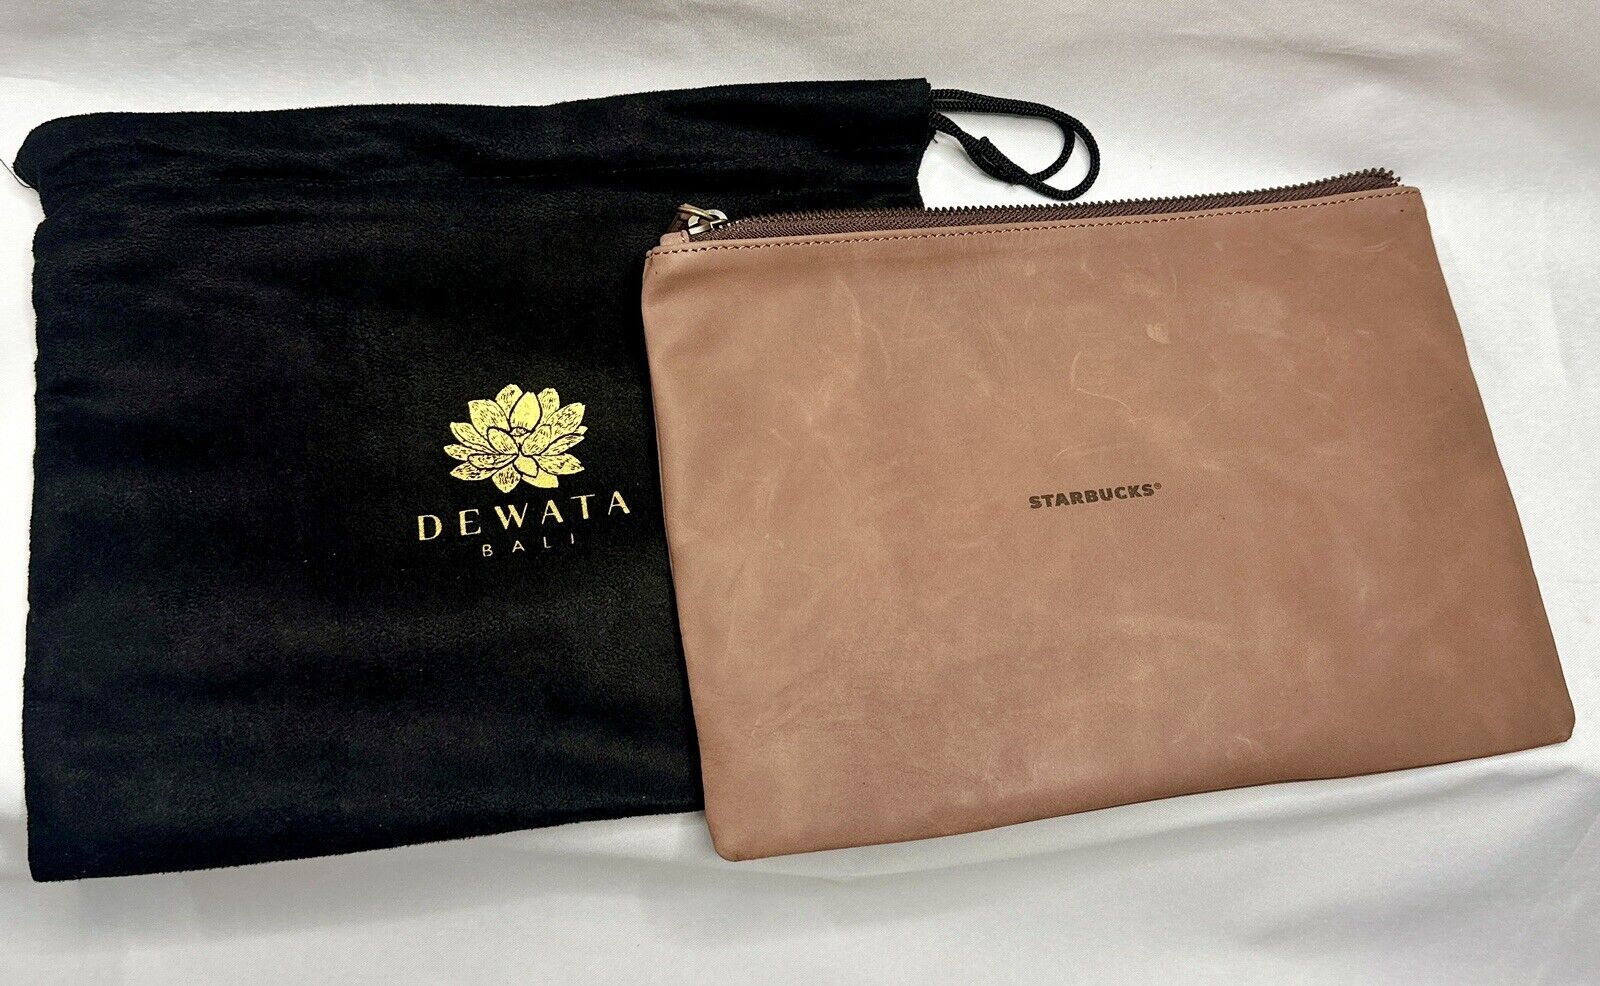 Starbucks Reserve Dewata Bali Indonesia Pouch Purse with Dust Bag 7”x9”